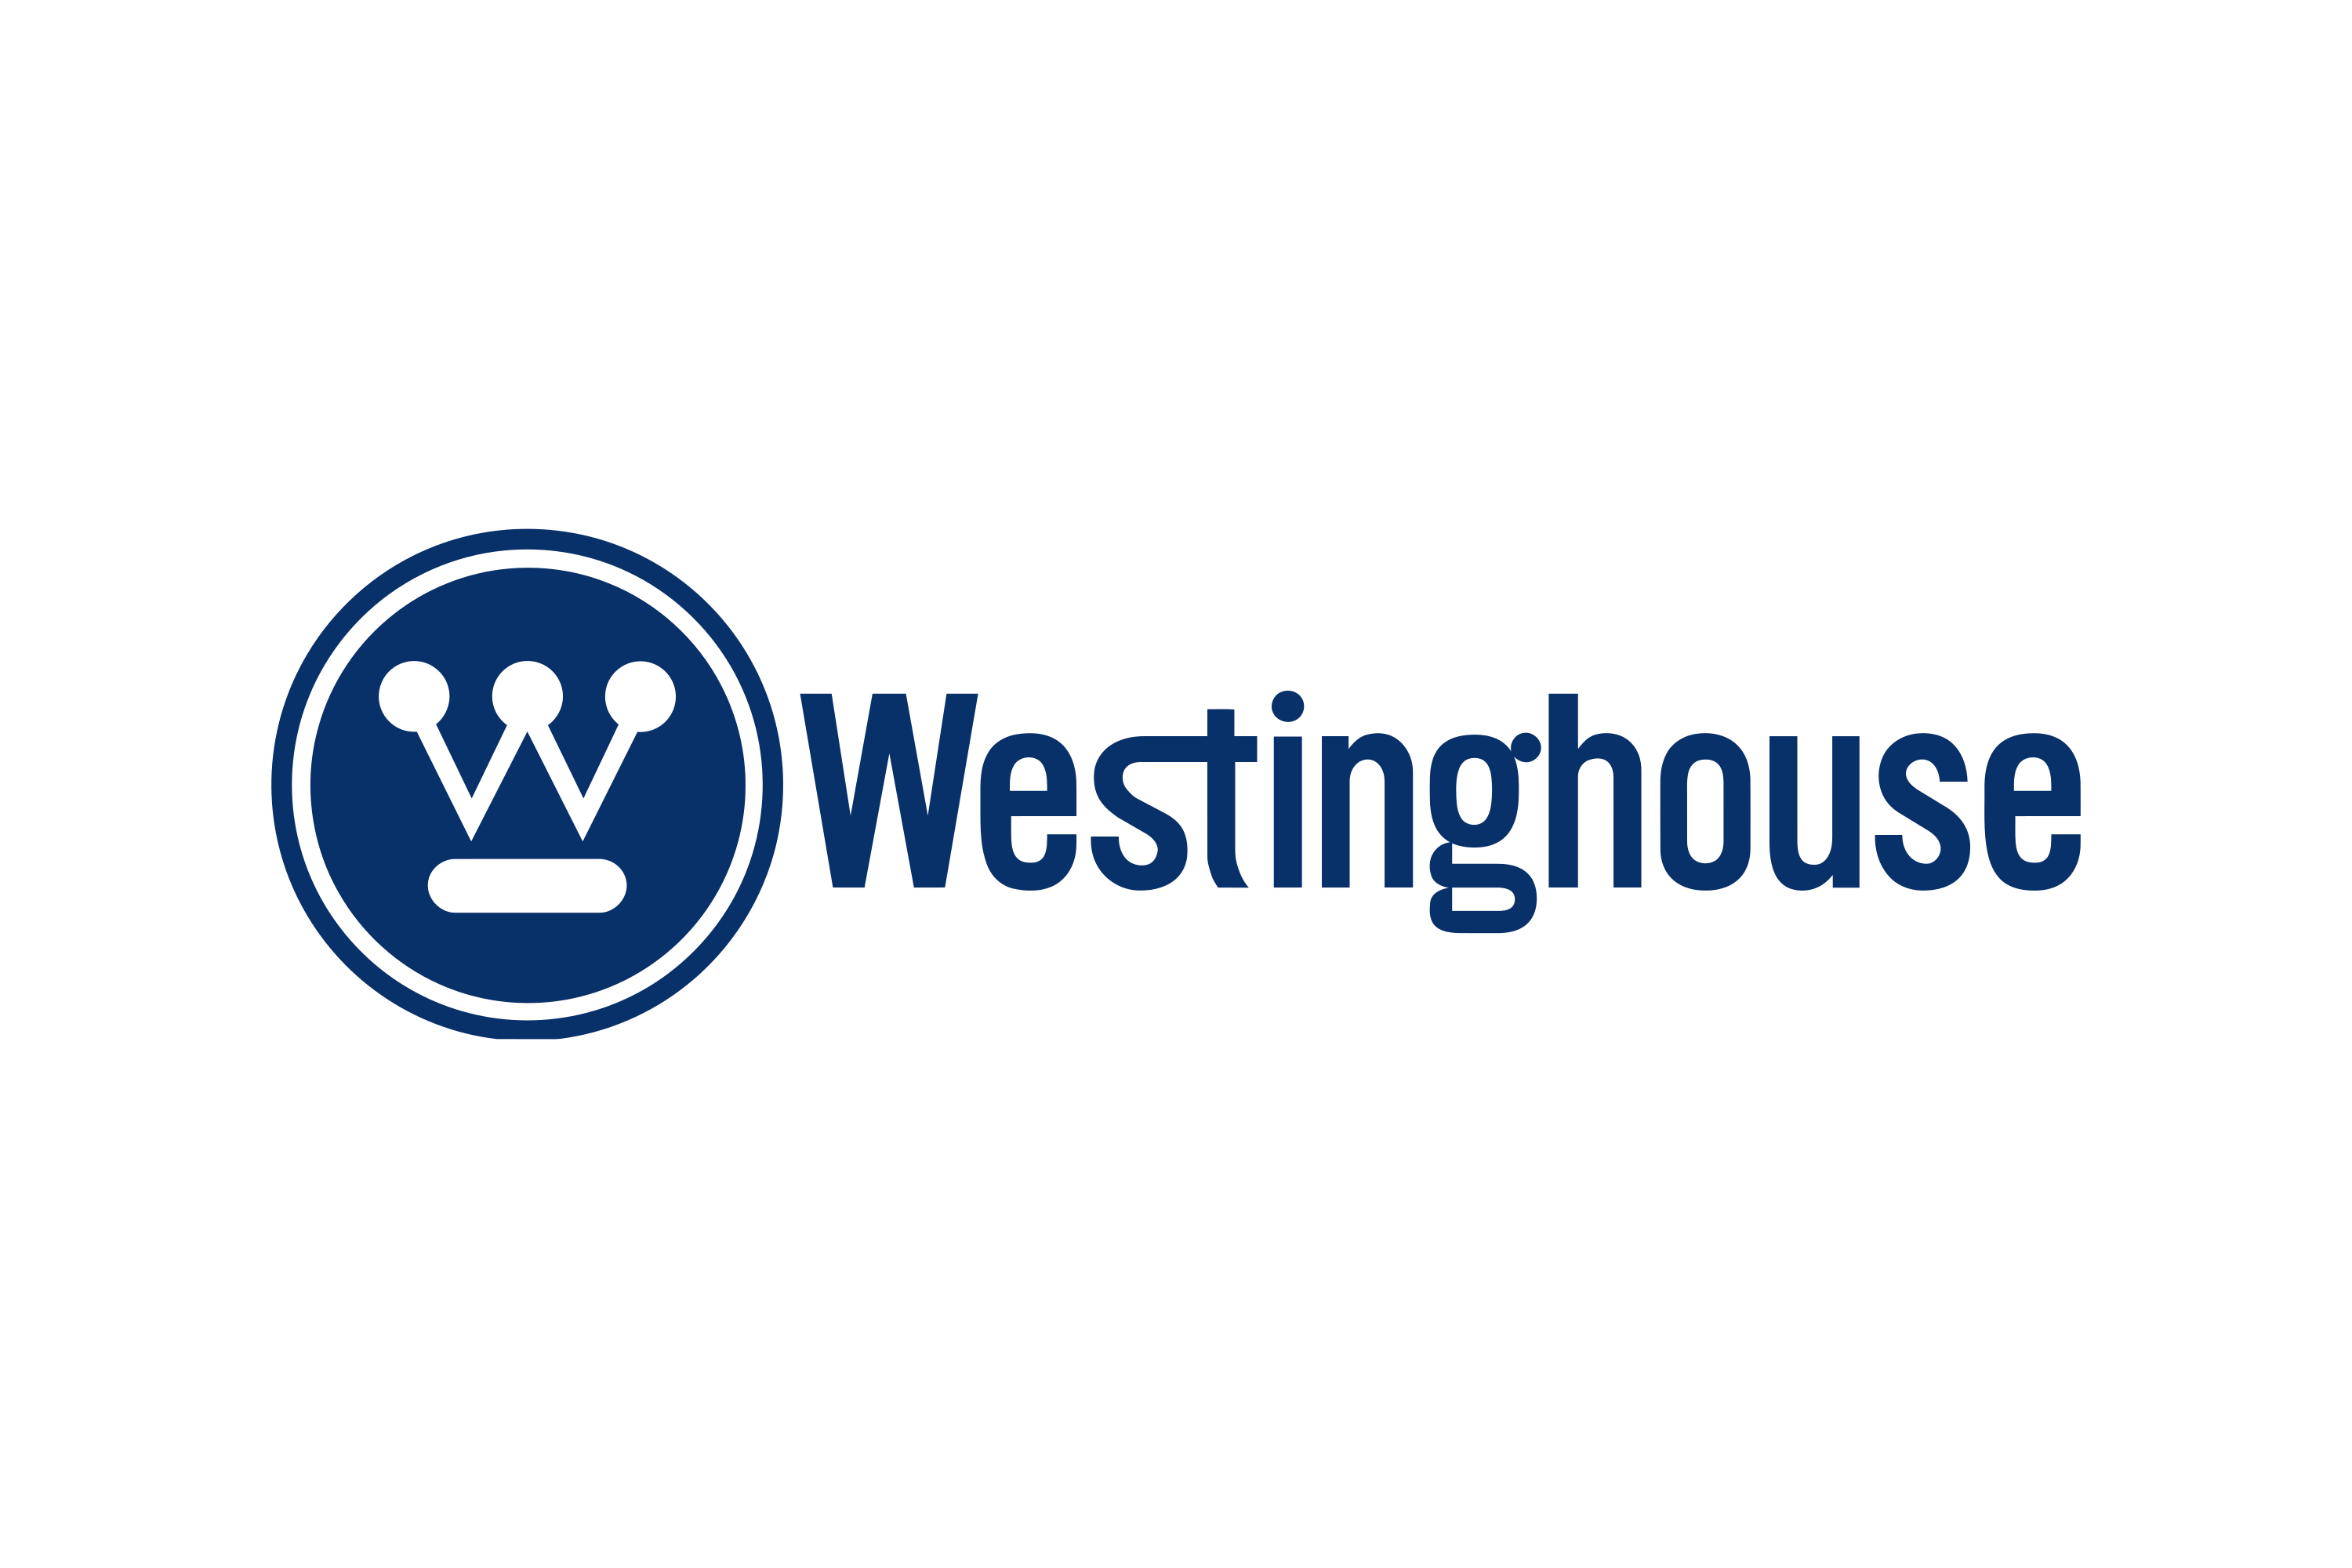 Download Westinghouse Electric Company Logo In Svg Vector Or Png Pluspng , Westinghouse Logo PNG - Free PNG